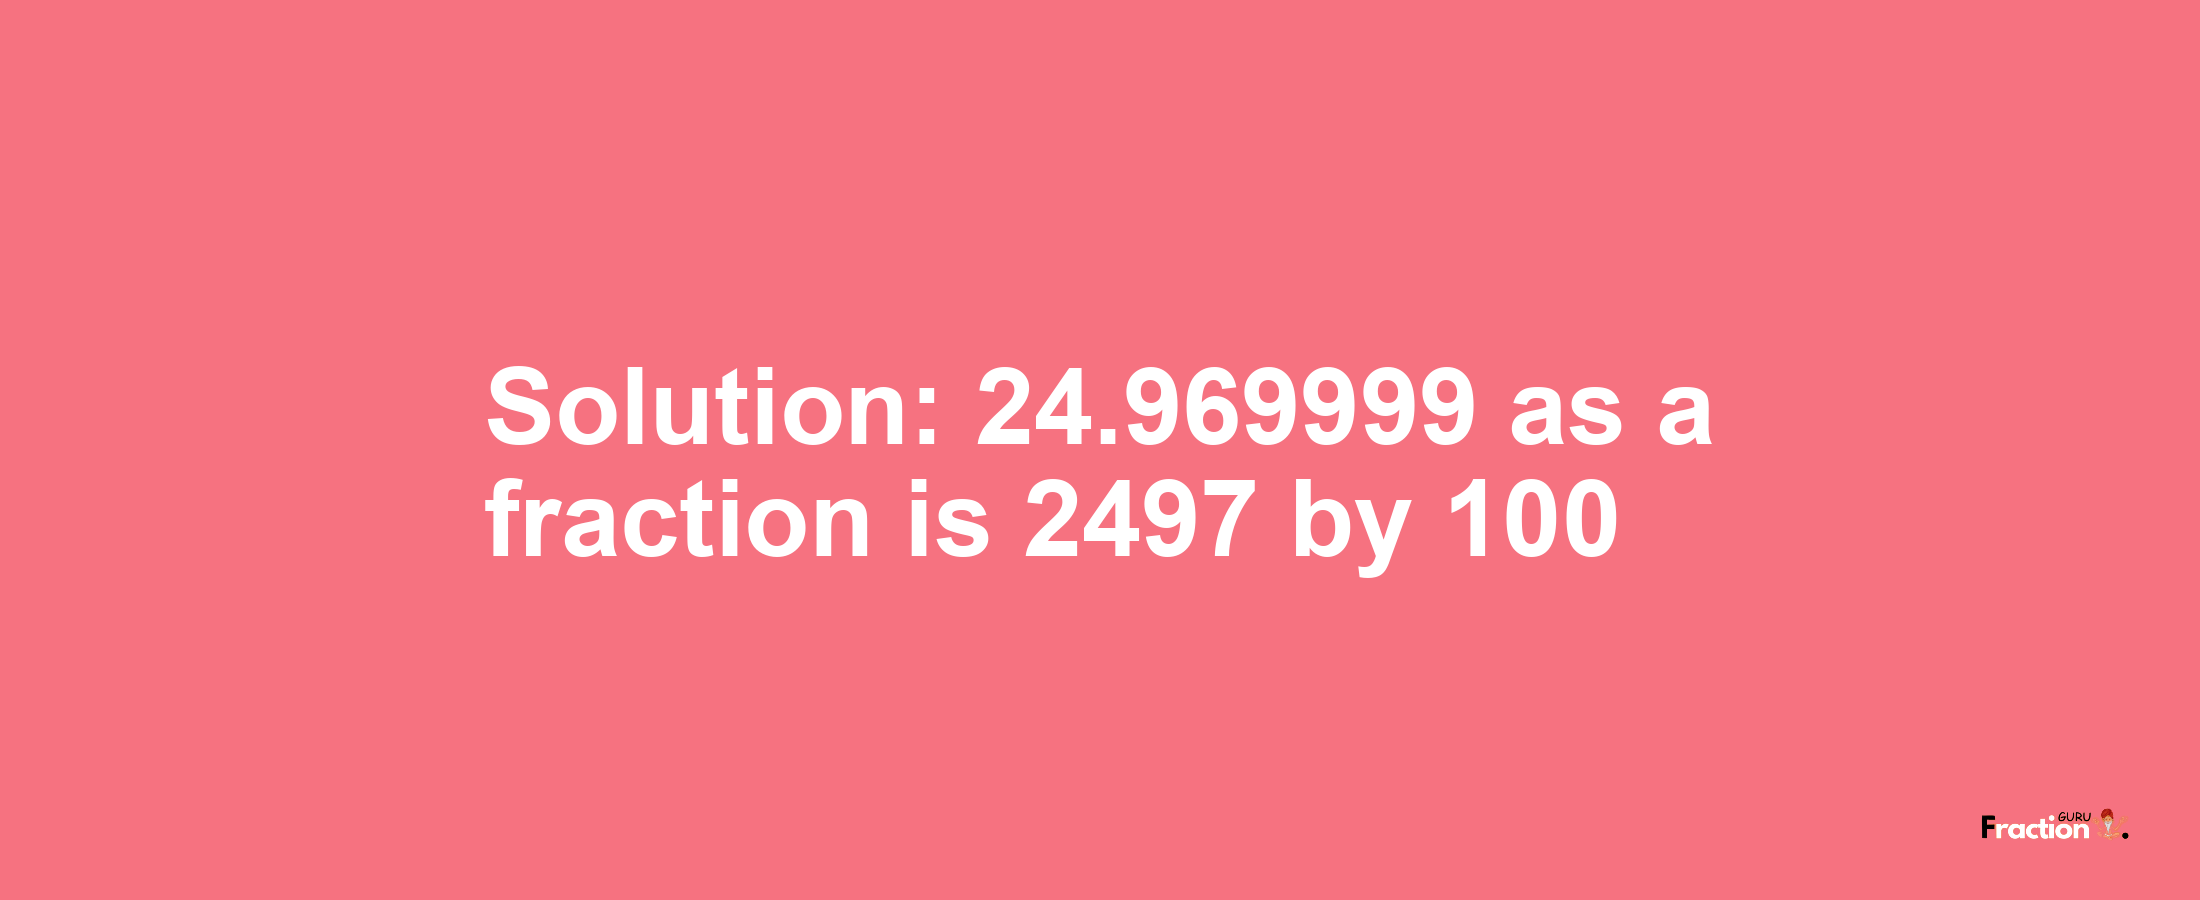 Solution:24.969999 as a fraction is 2497/100